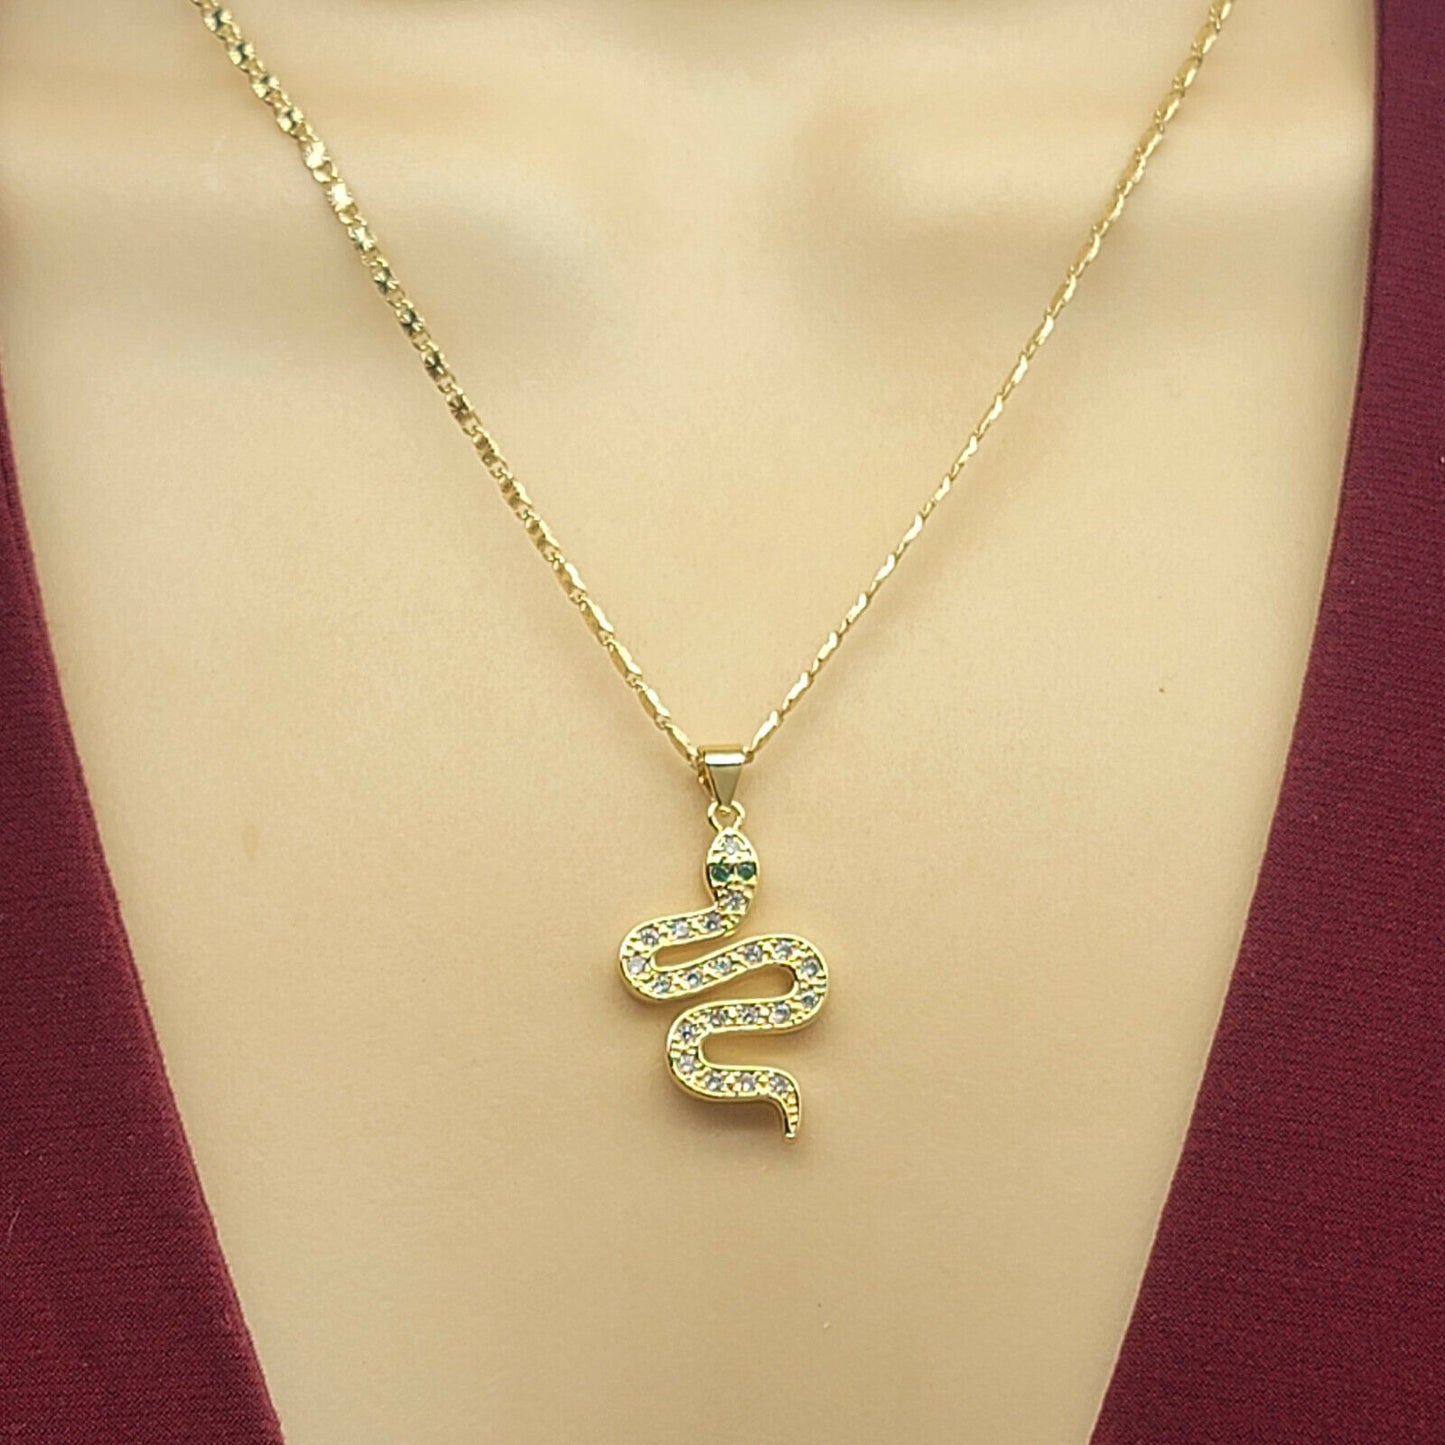 Necklaces - 14K Gold Plated. Snake Pendant & Chain.